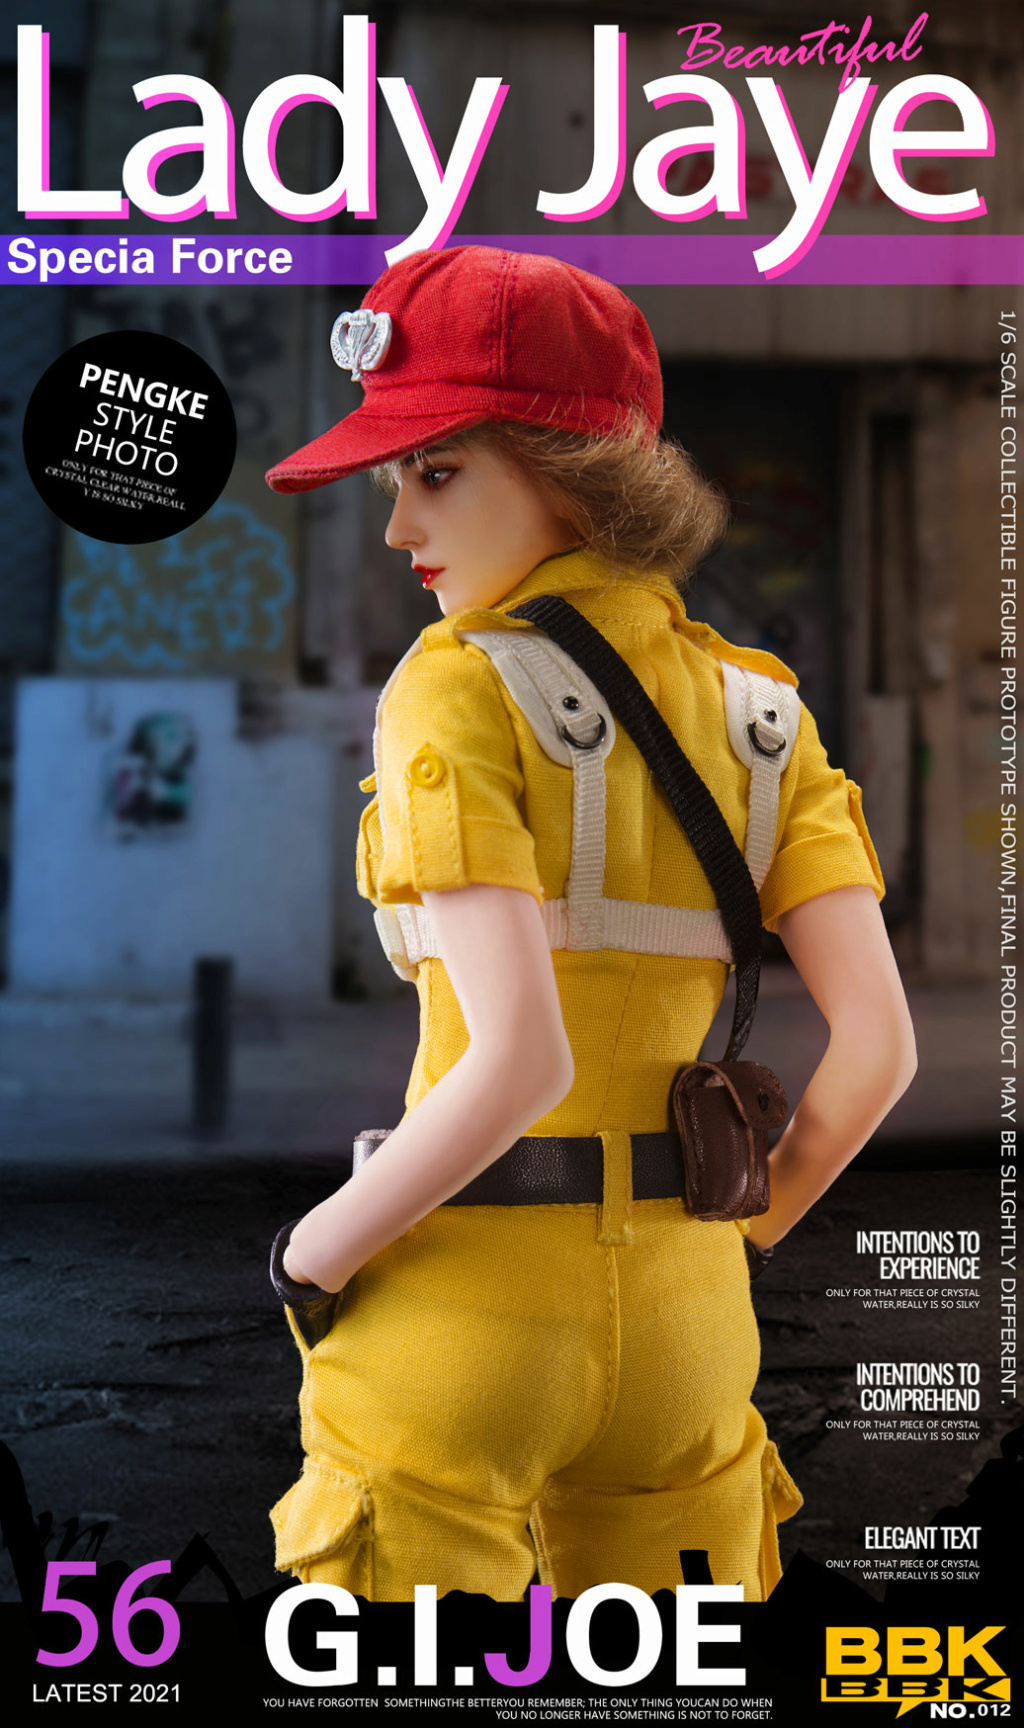 military - NEW PRODUCT: BBK: 1/6 GIJOE Jay Female Soldier Action Figure# 14575812